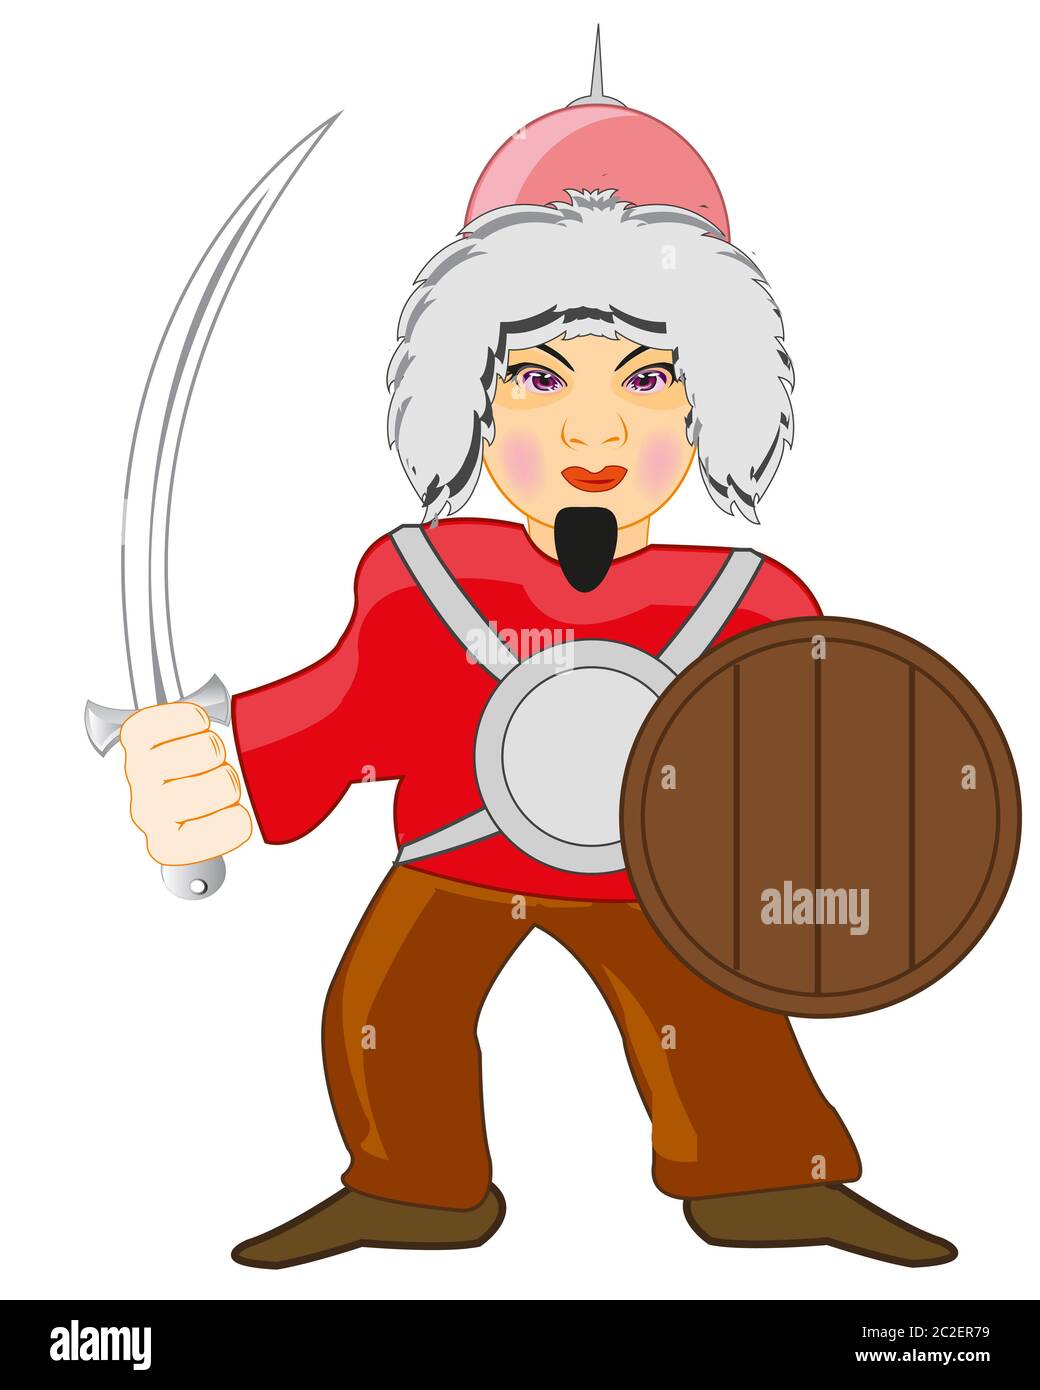 Vector illustration of the cartoon of the old-time mongolian warrior Stock Photo